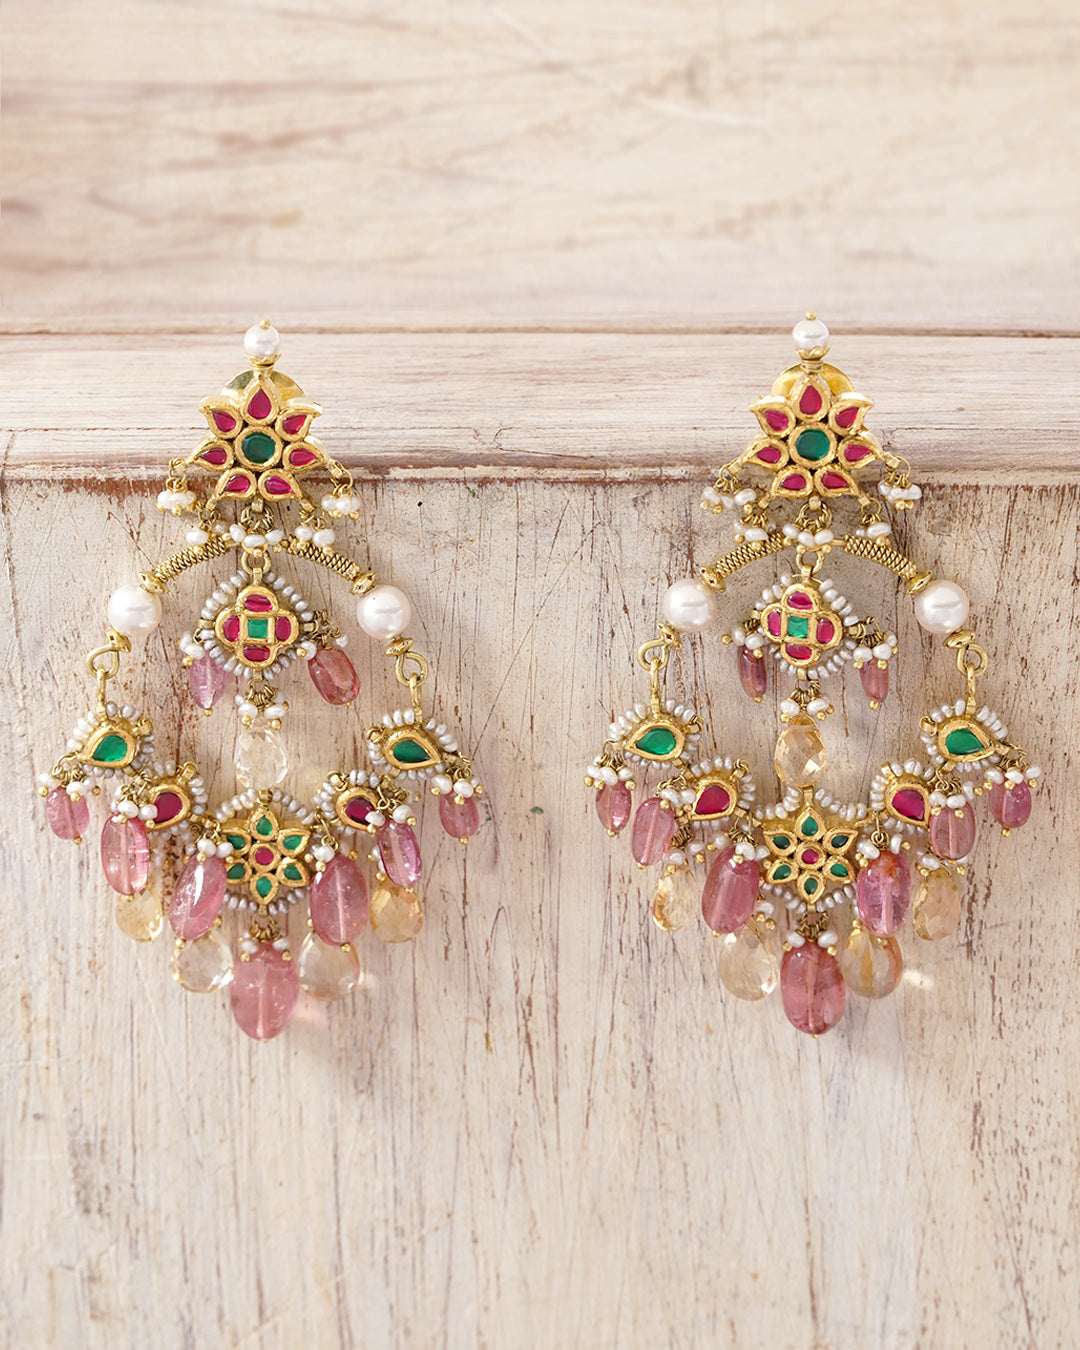 Full 4K Collection of Amazing Earrings Images – Over 999+ Top-notch Earrings Images